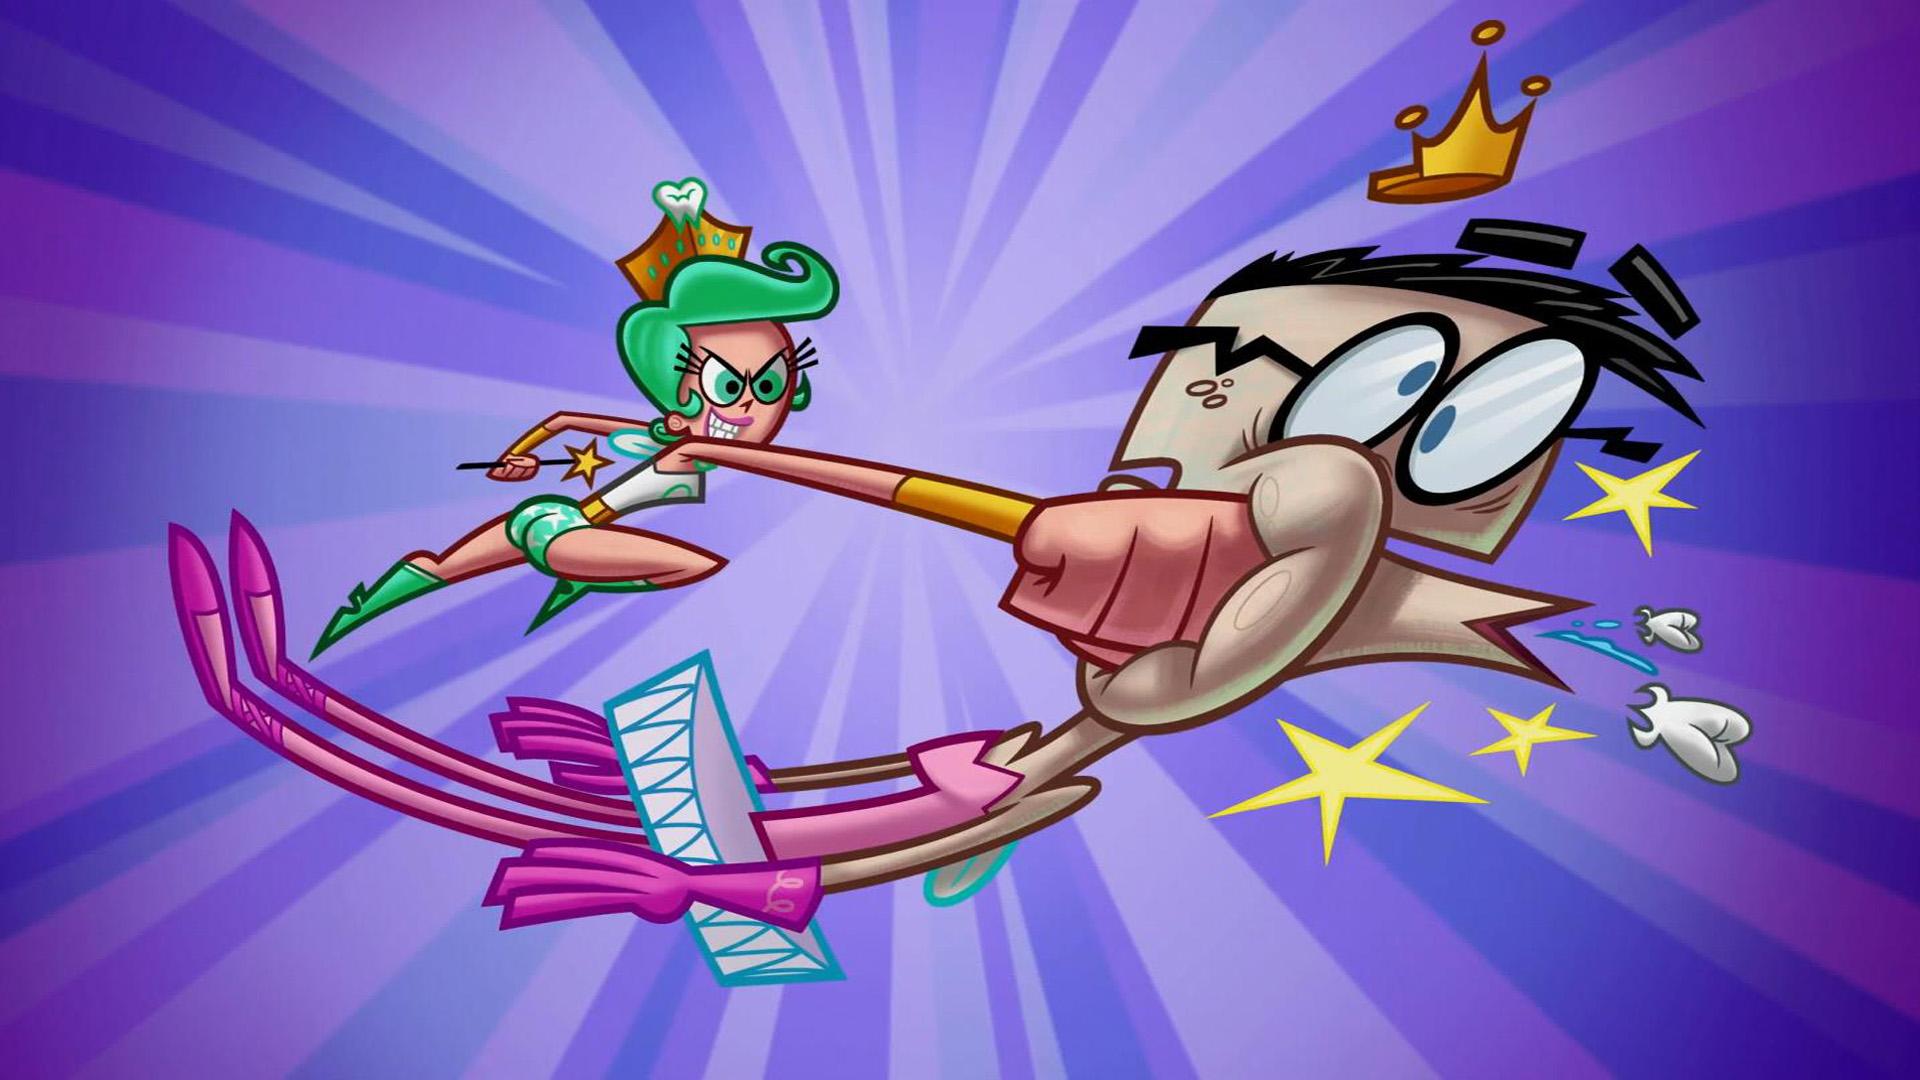 Tooth Fairy Beta Beater. The Fairly OddParents